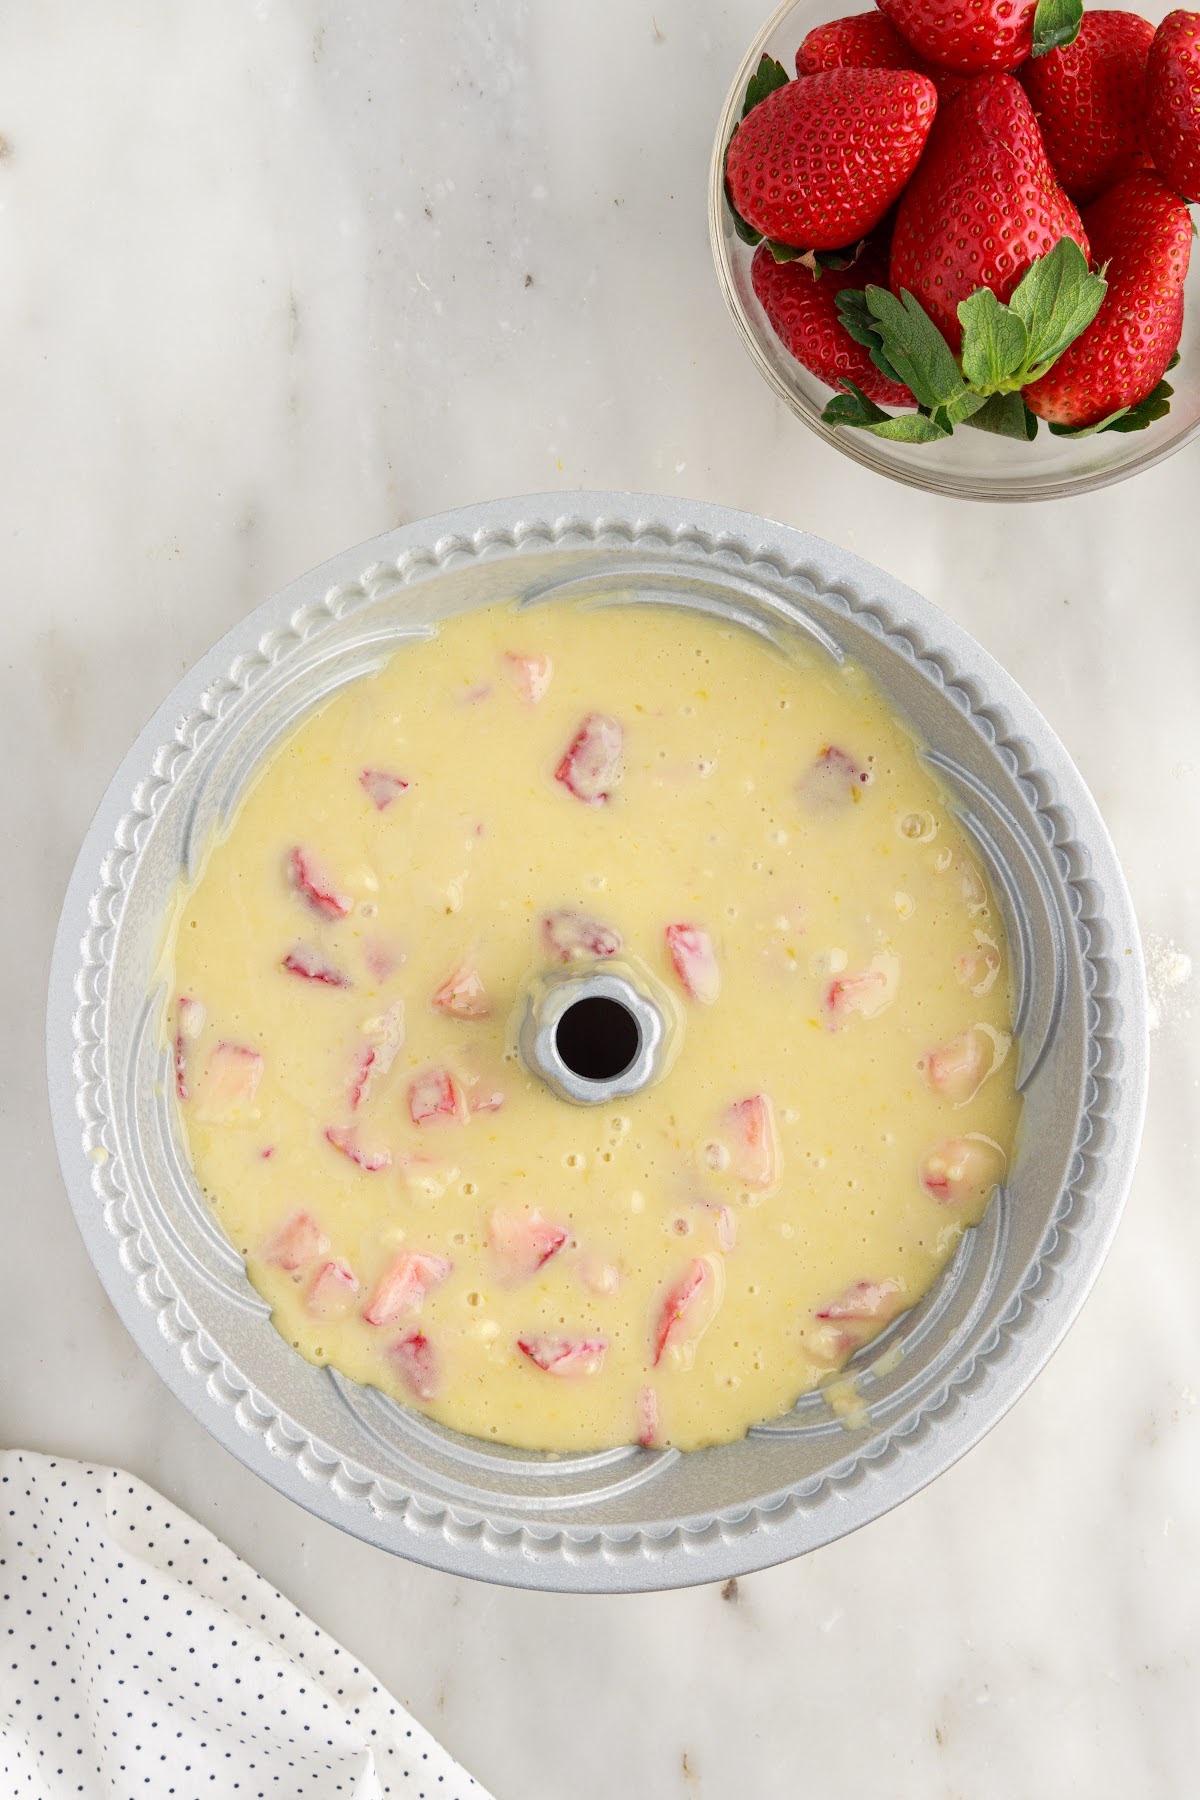 Strawberry Bundt Cake batter added to a bundt pan next to a bowl of strawberries.